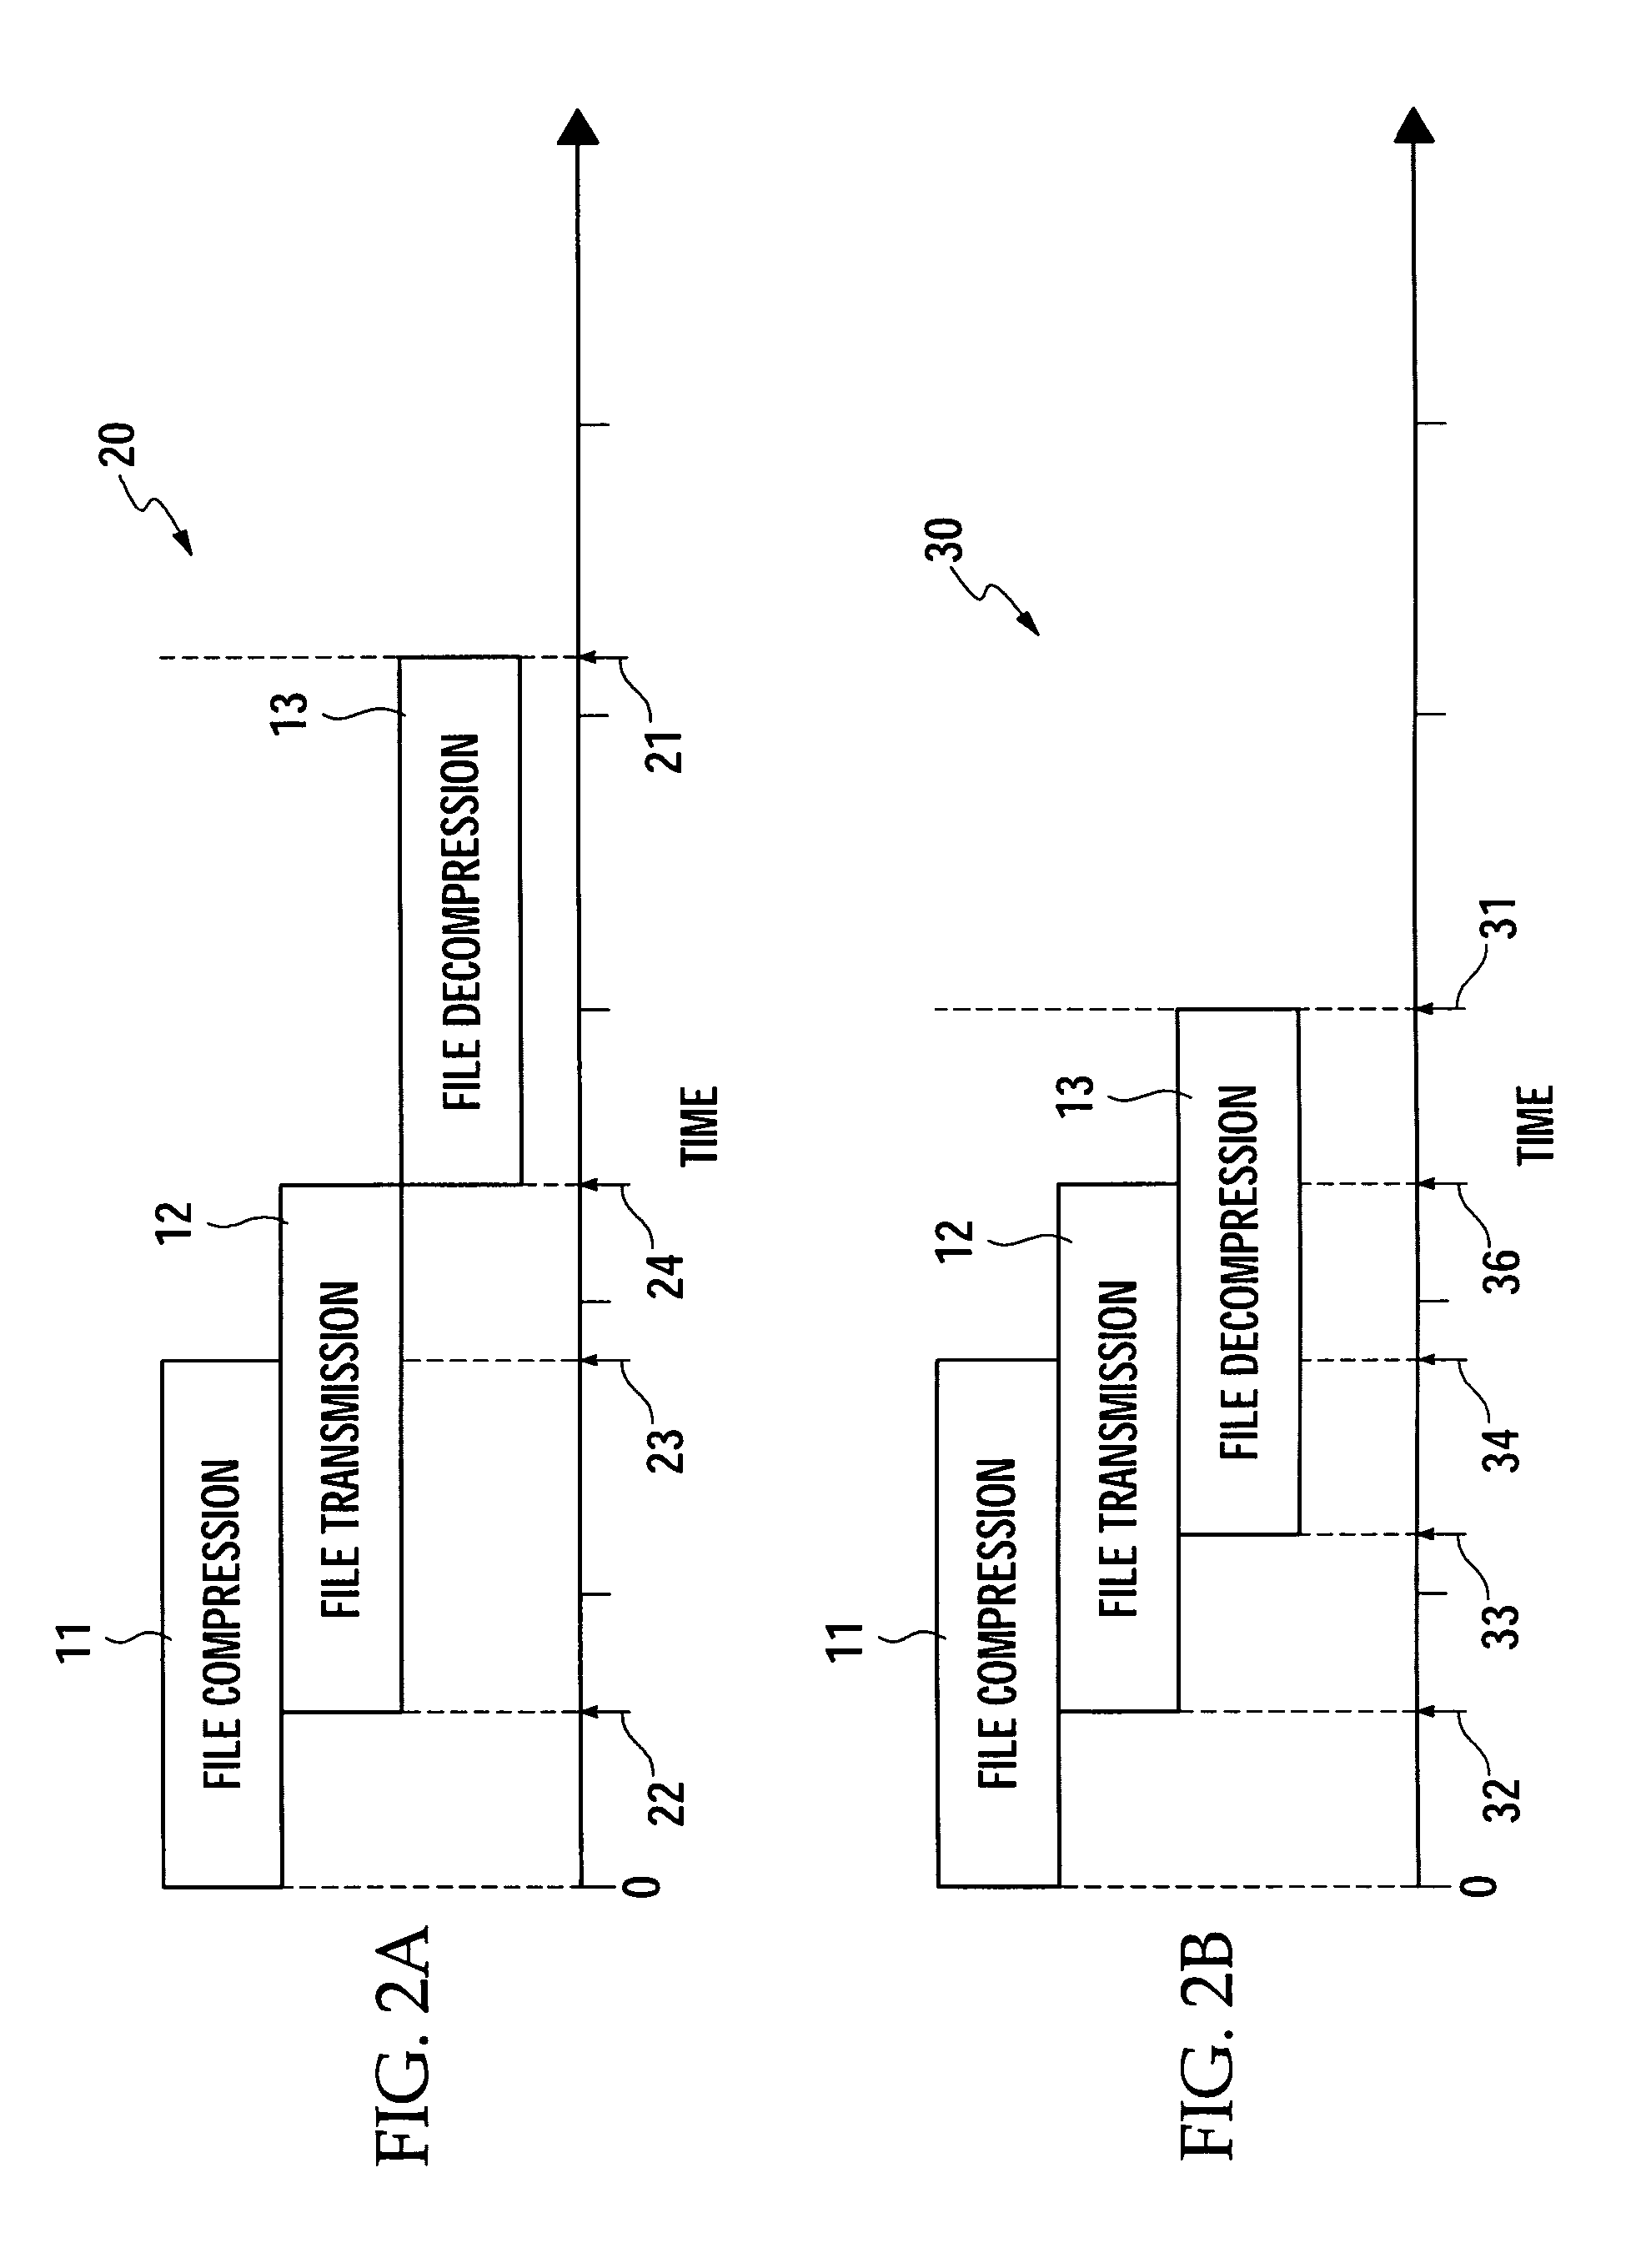 Apparatus and method for efficiently and securely transferring files over a communications network